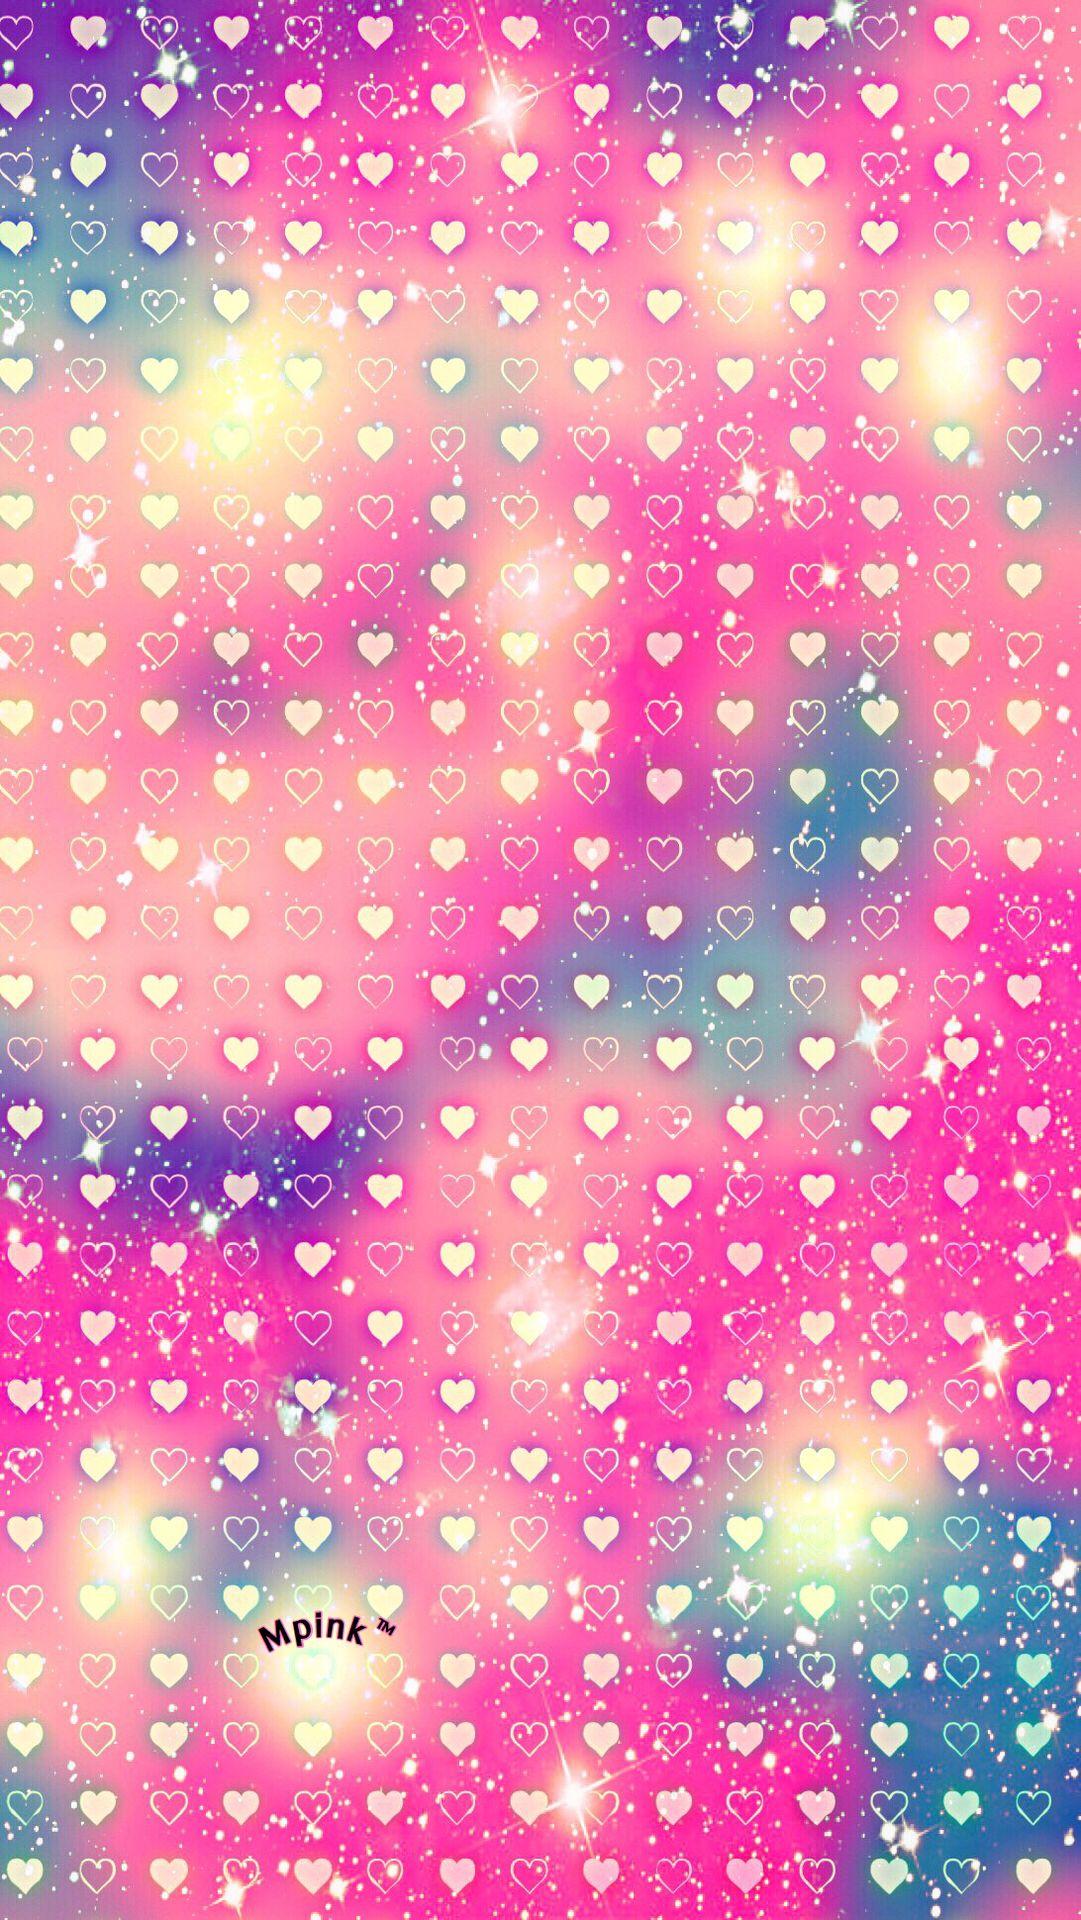 Shimmer Hearts Pattern IPhone Android Wallpaper #pattern